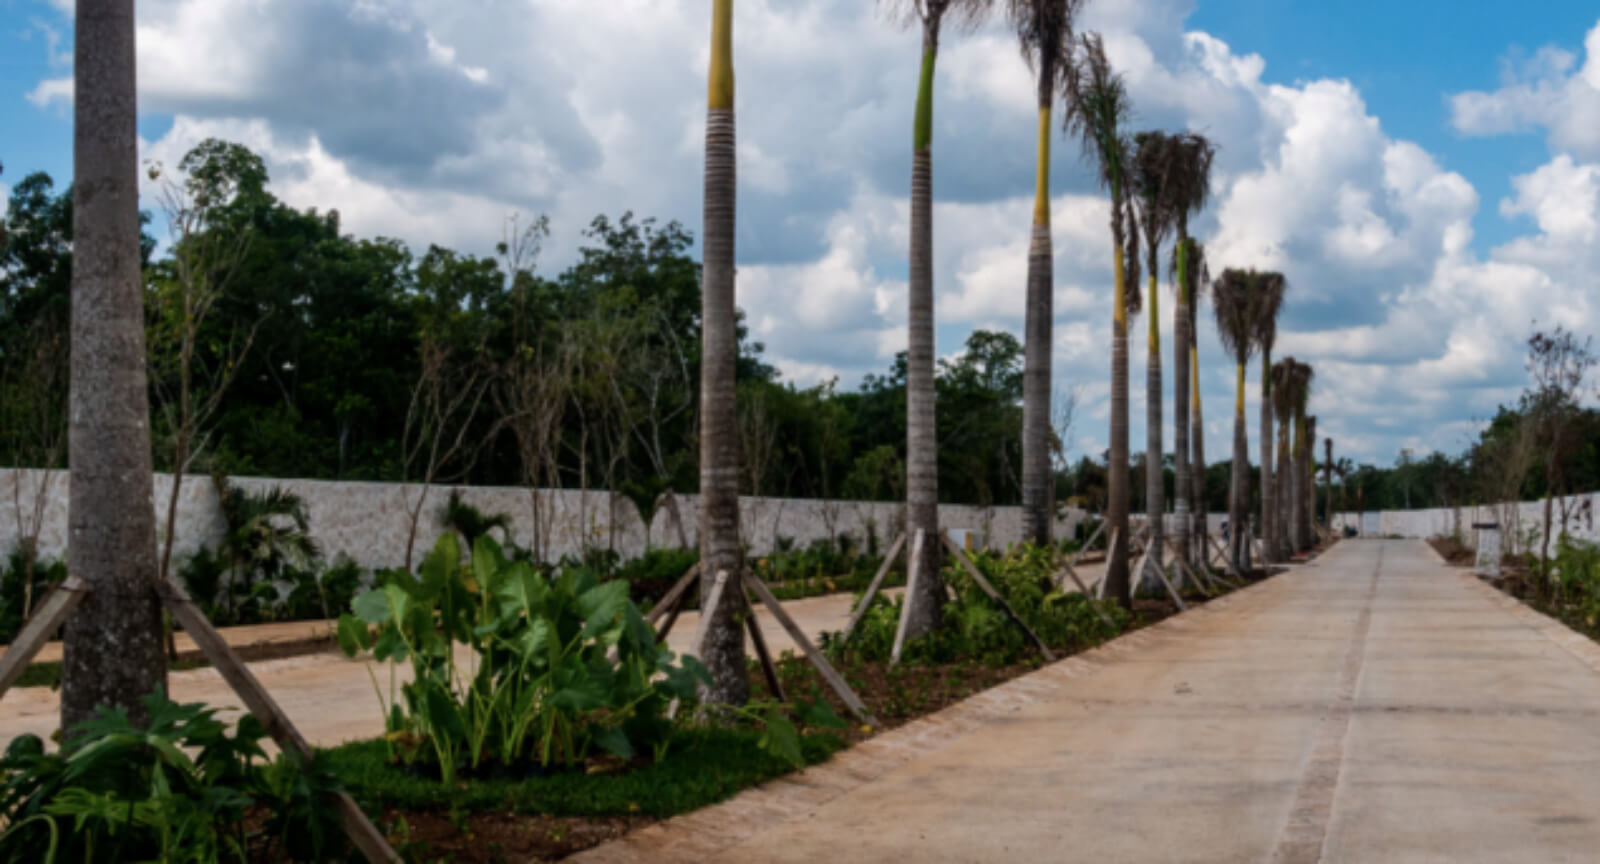 Lot in gated community with clubhouse, game room, pet park, and more for sale in Cancun